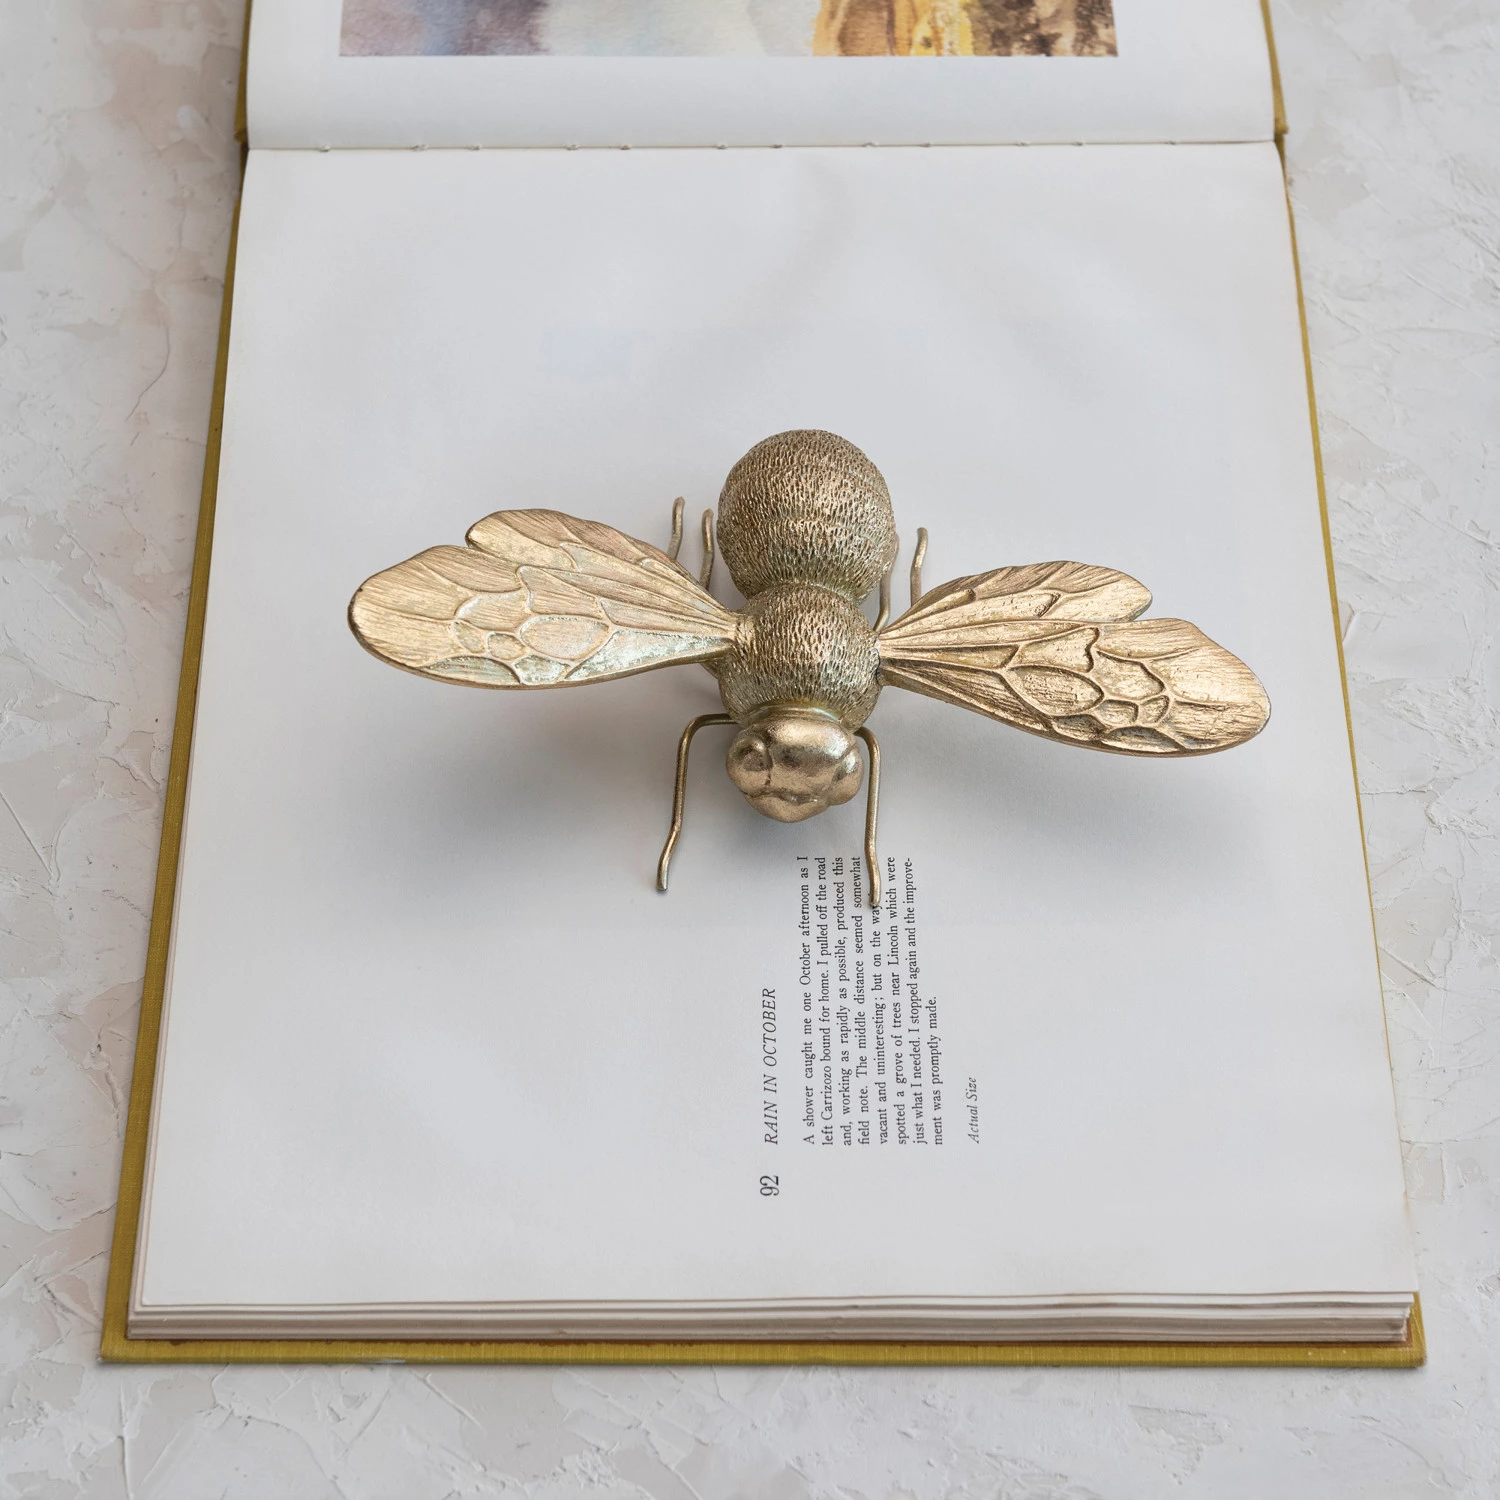 Resin Bee For Shelf or Wall - Gold Finish 9-in - Mellow Monkey